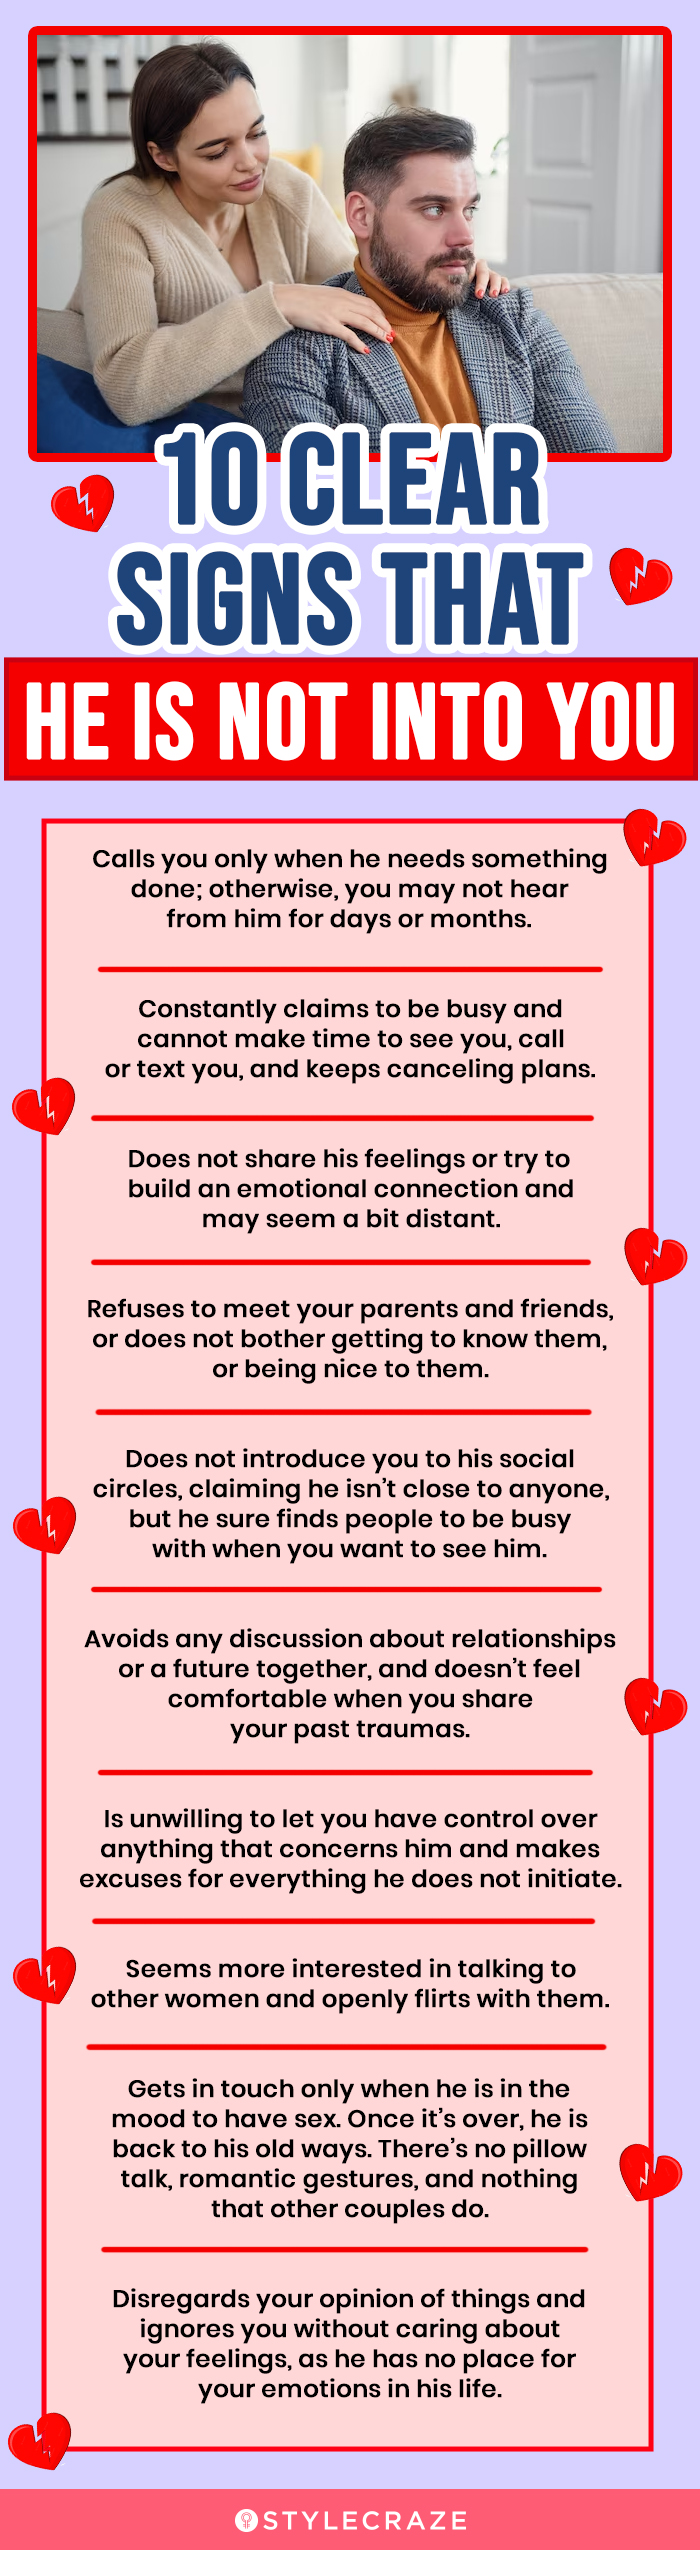 10 clear signs that he is not into you (infographic)